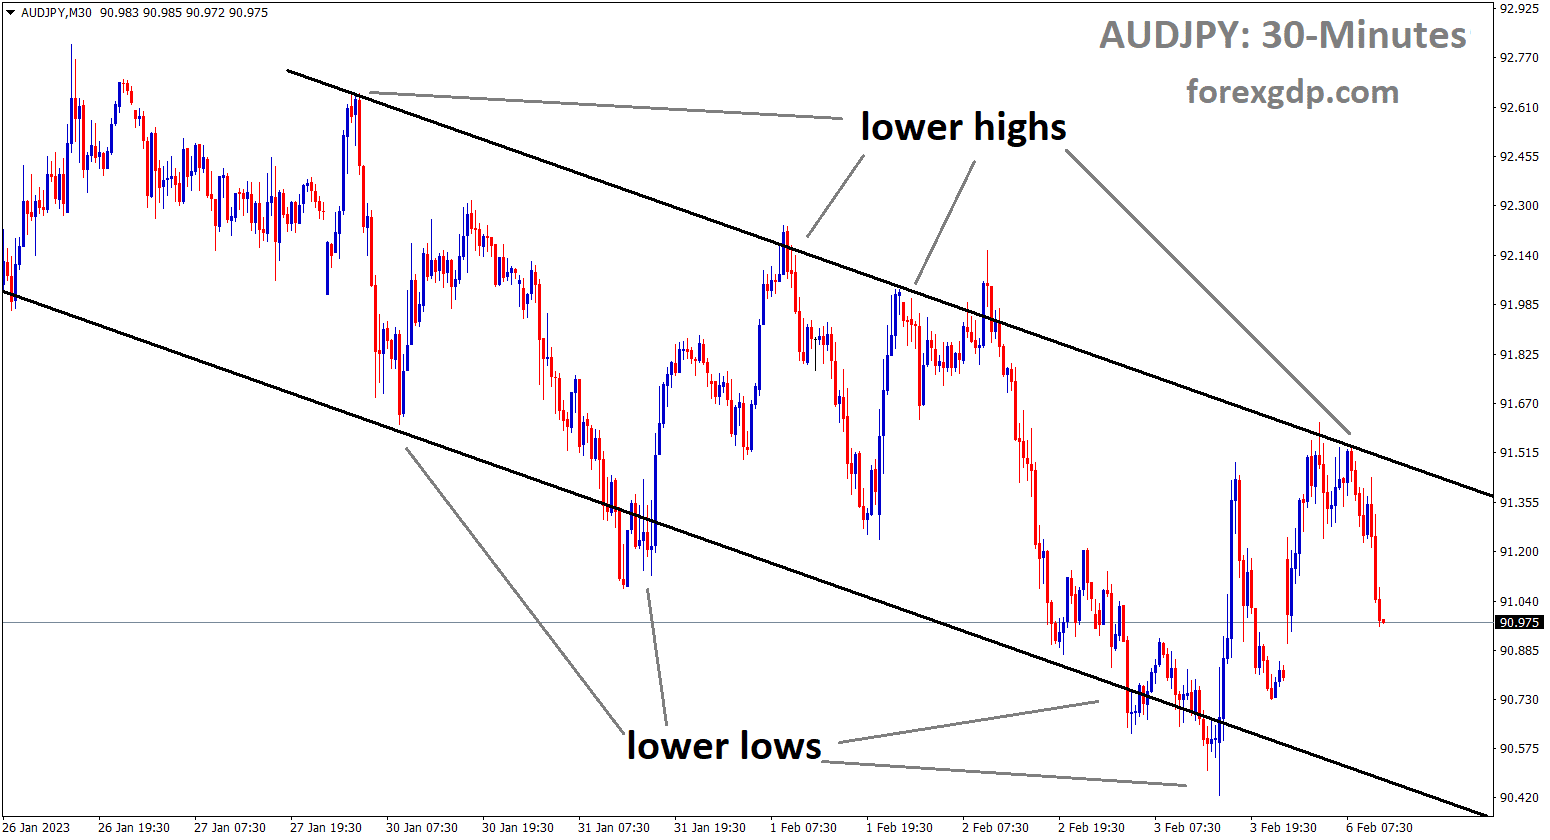 AUDJPY is moving in a Descending channel and the market has fallen from the lower high area of the channel